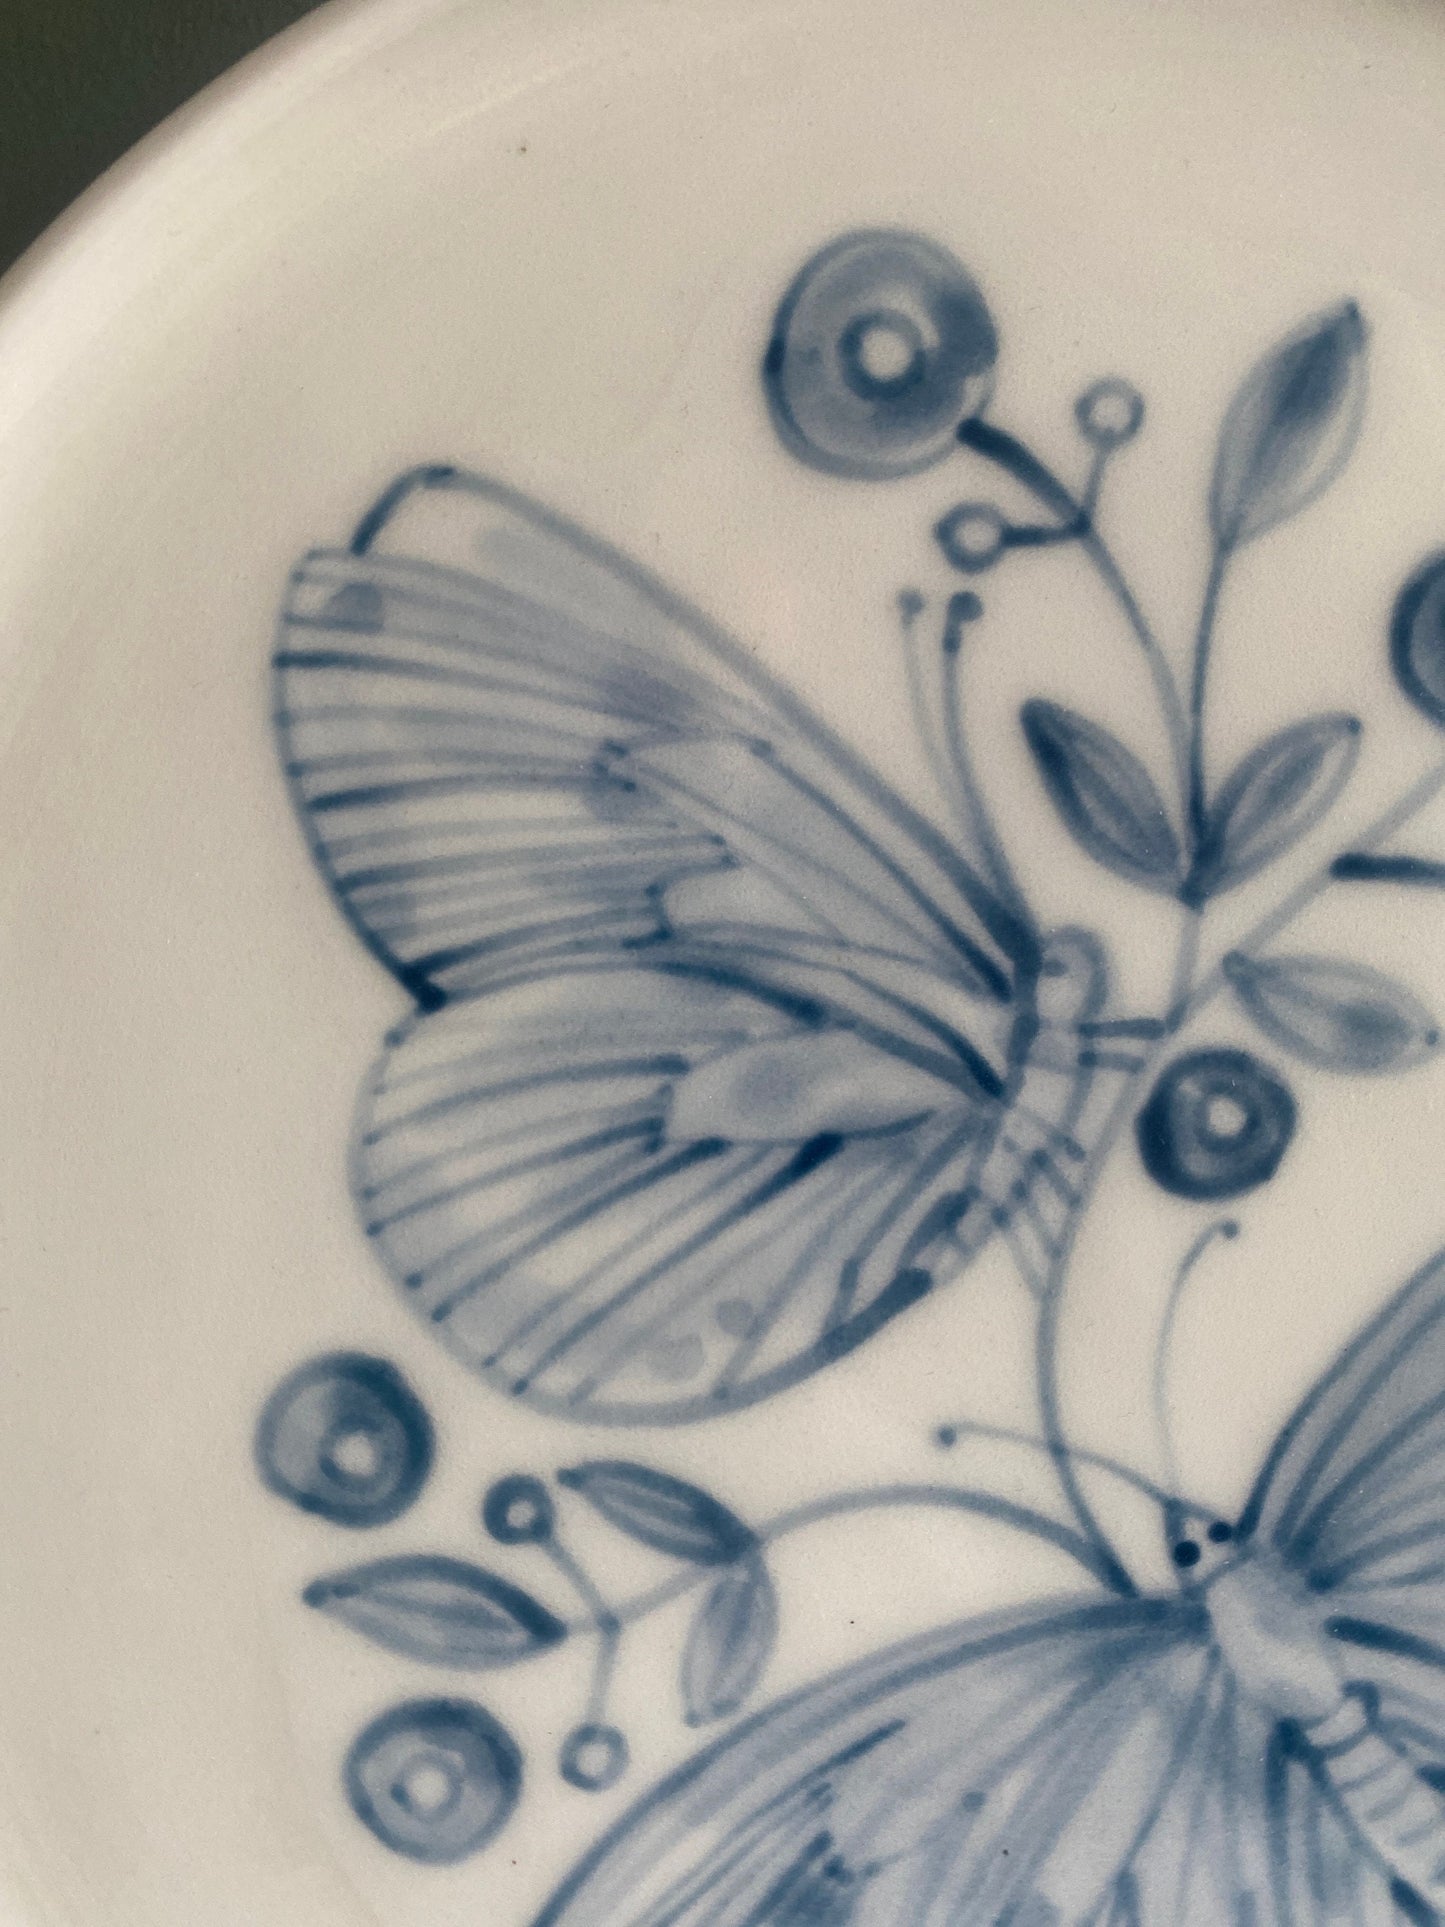 Butterfly porcelain ceramic plate, hand painted and handmade